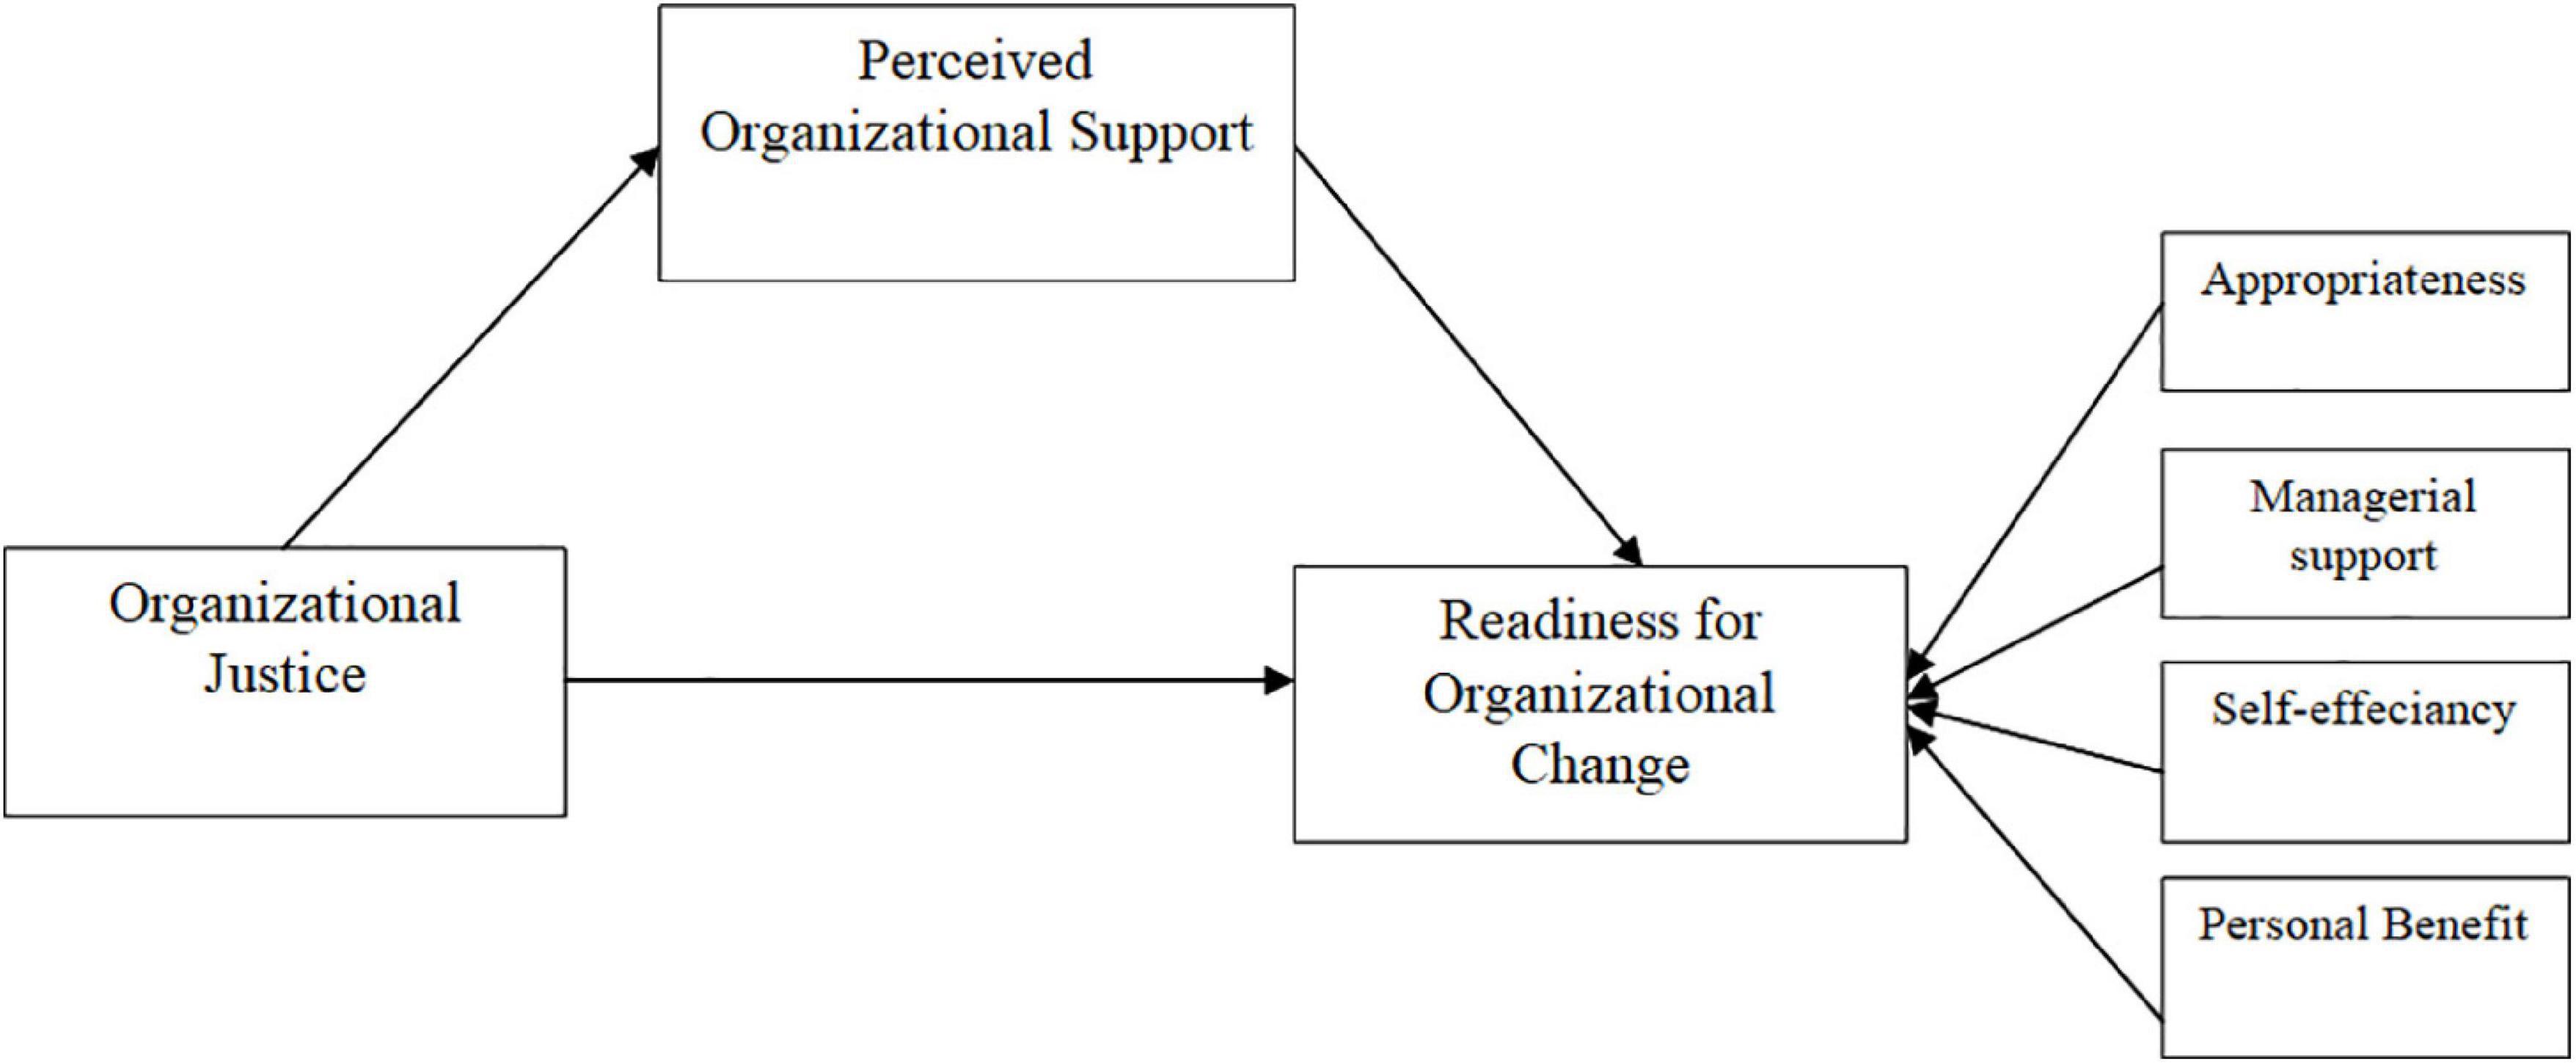 research paper topics about organizational change